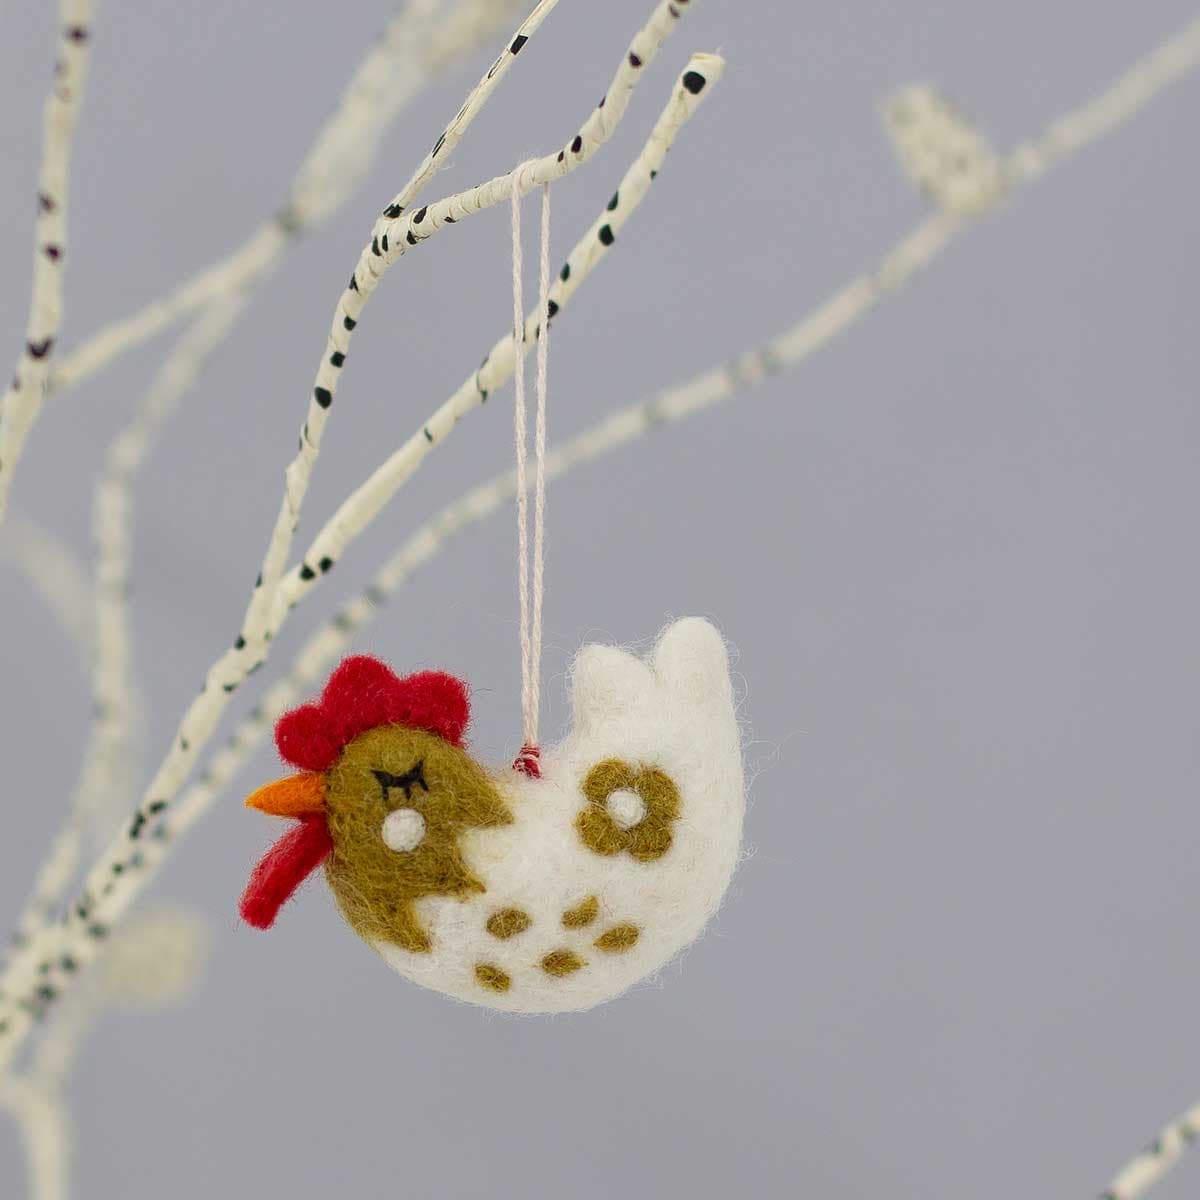 SLEEPING ROOSTER Easter ornament